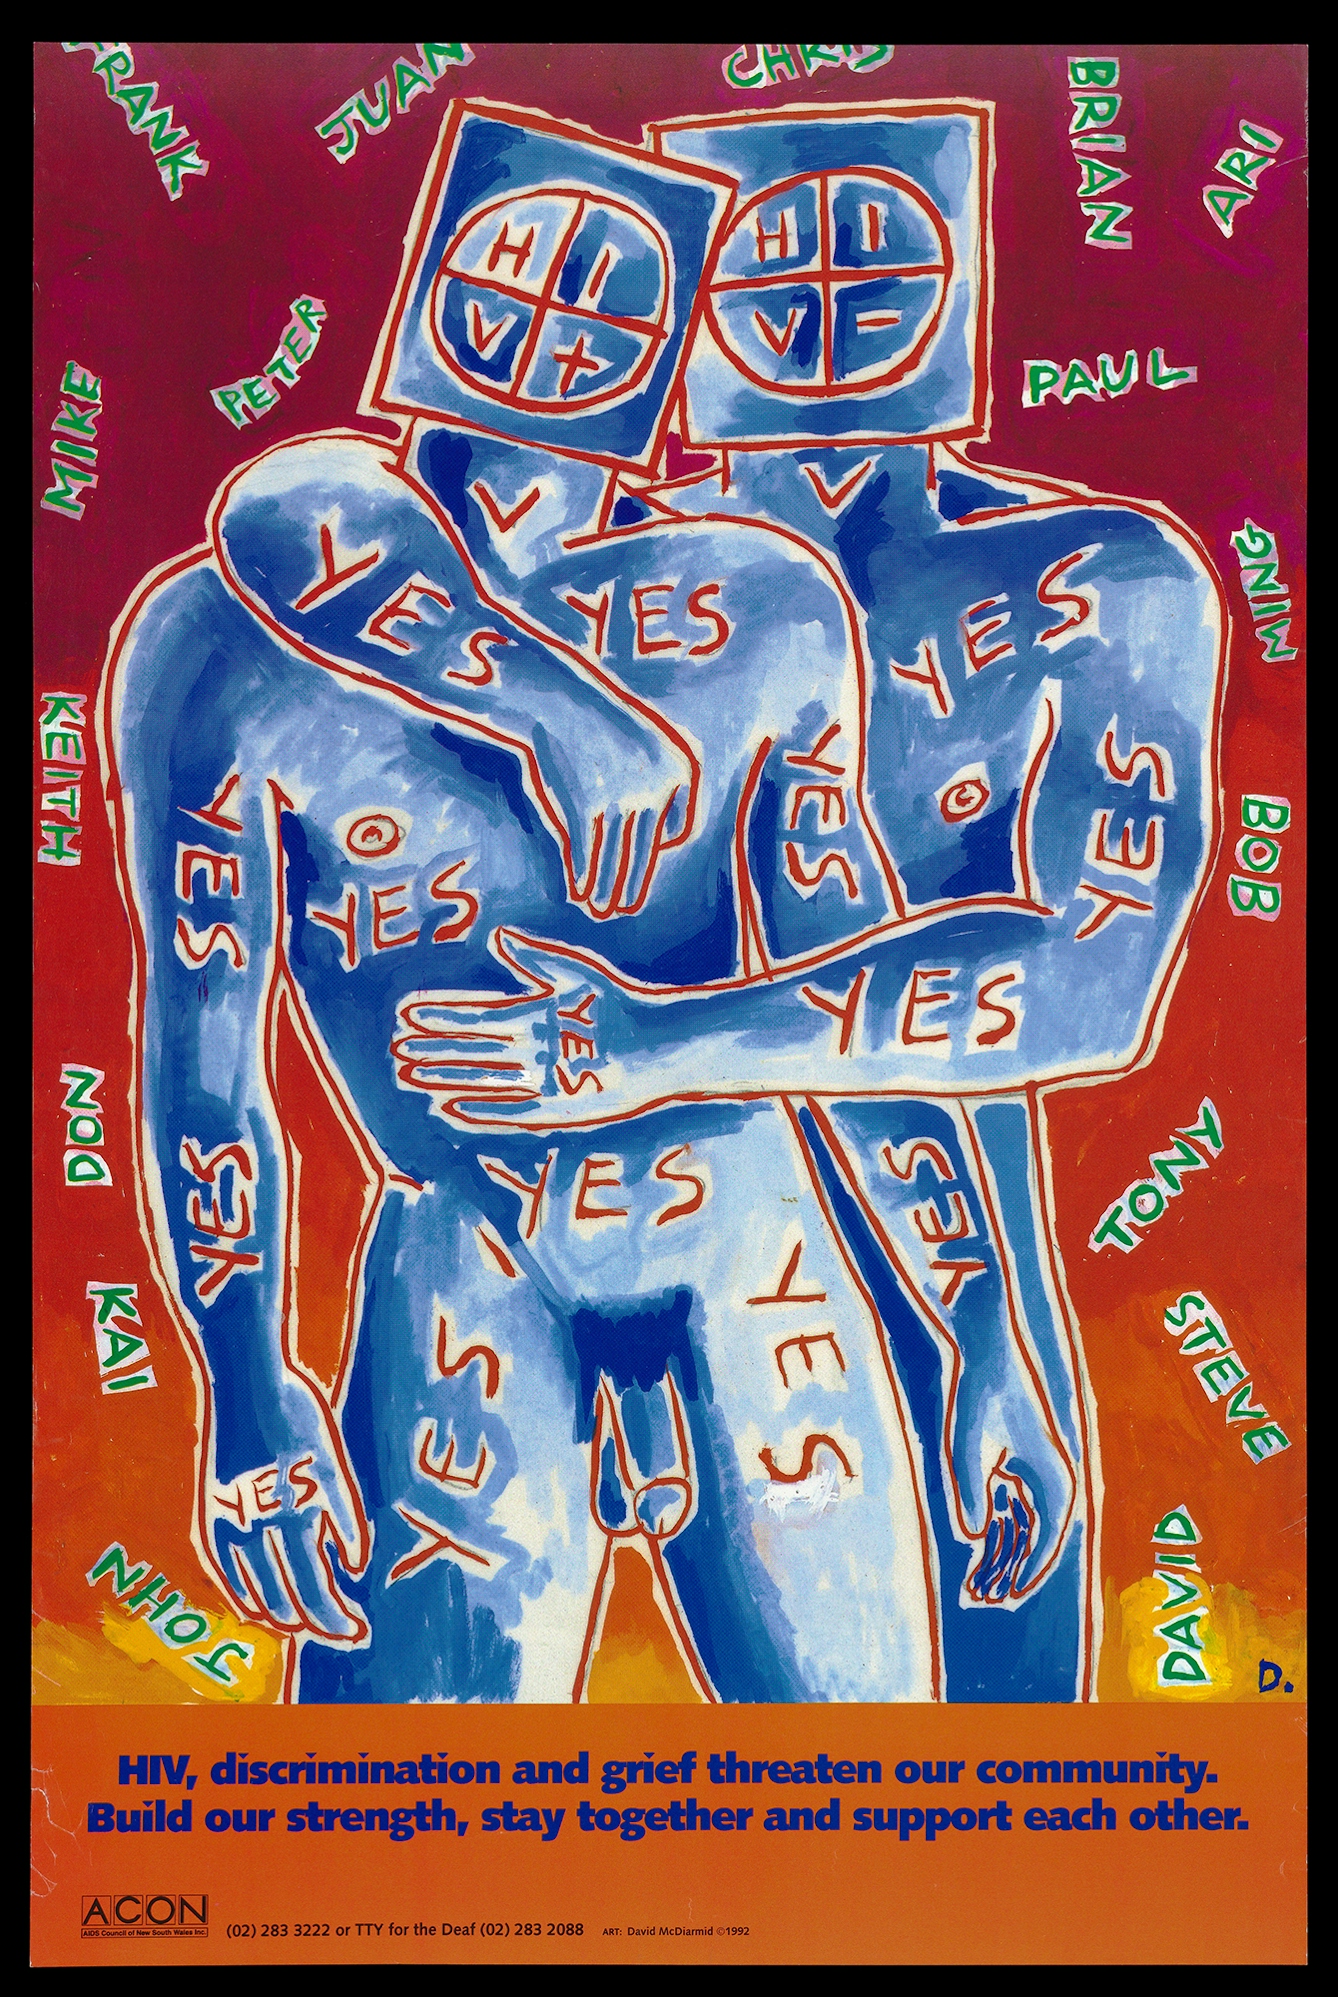 Two naked male figures stand together, the one behind hugs the one infront. Their heads are replaced by squares with a circle divided in four inside. One circle has HIV+, the other circle says HIV_. The word yes is written all over thier bodies and behind them in the background are random men's names. At the bottom of the poster the slogan says "HIV, discrimination and grief threaten out community. Build our strength, stay together and support each other."